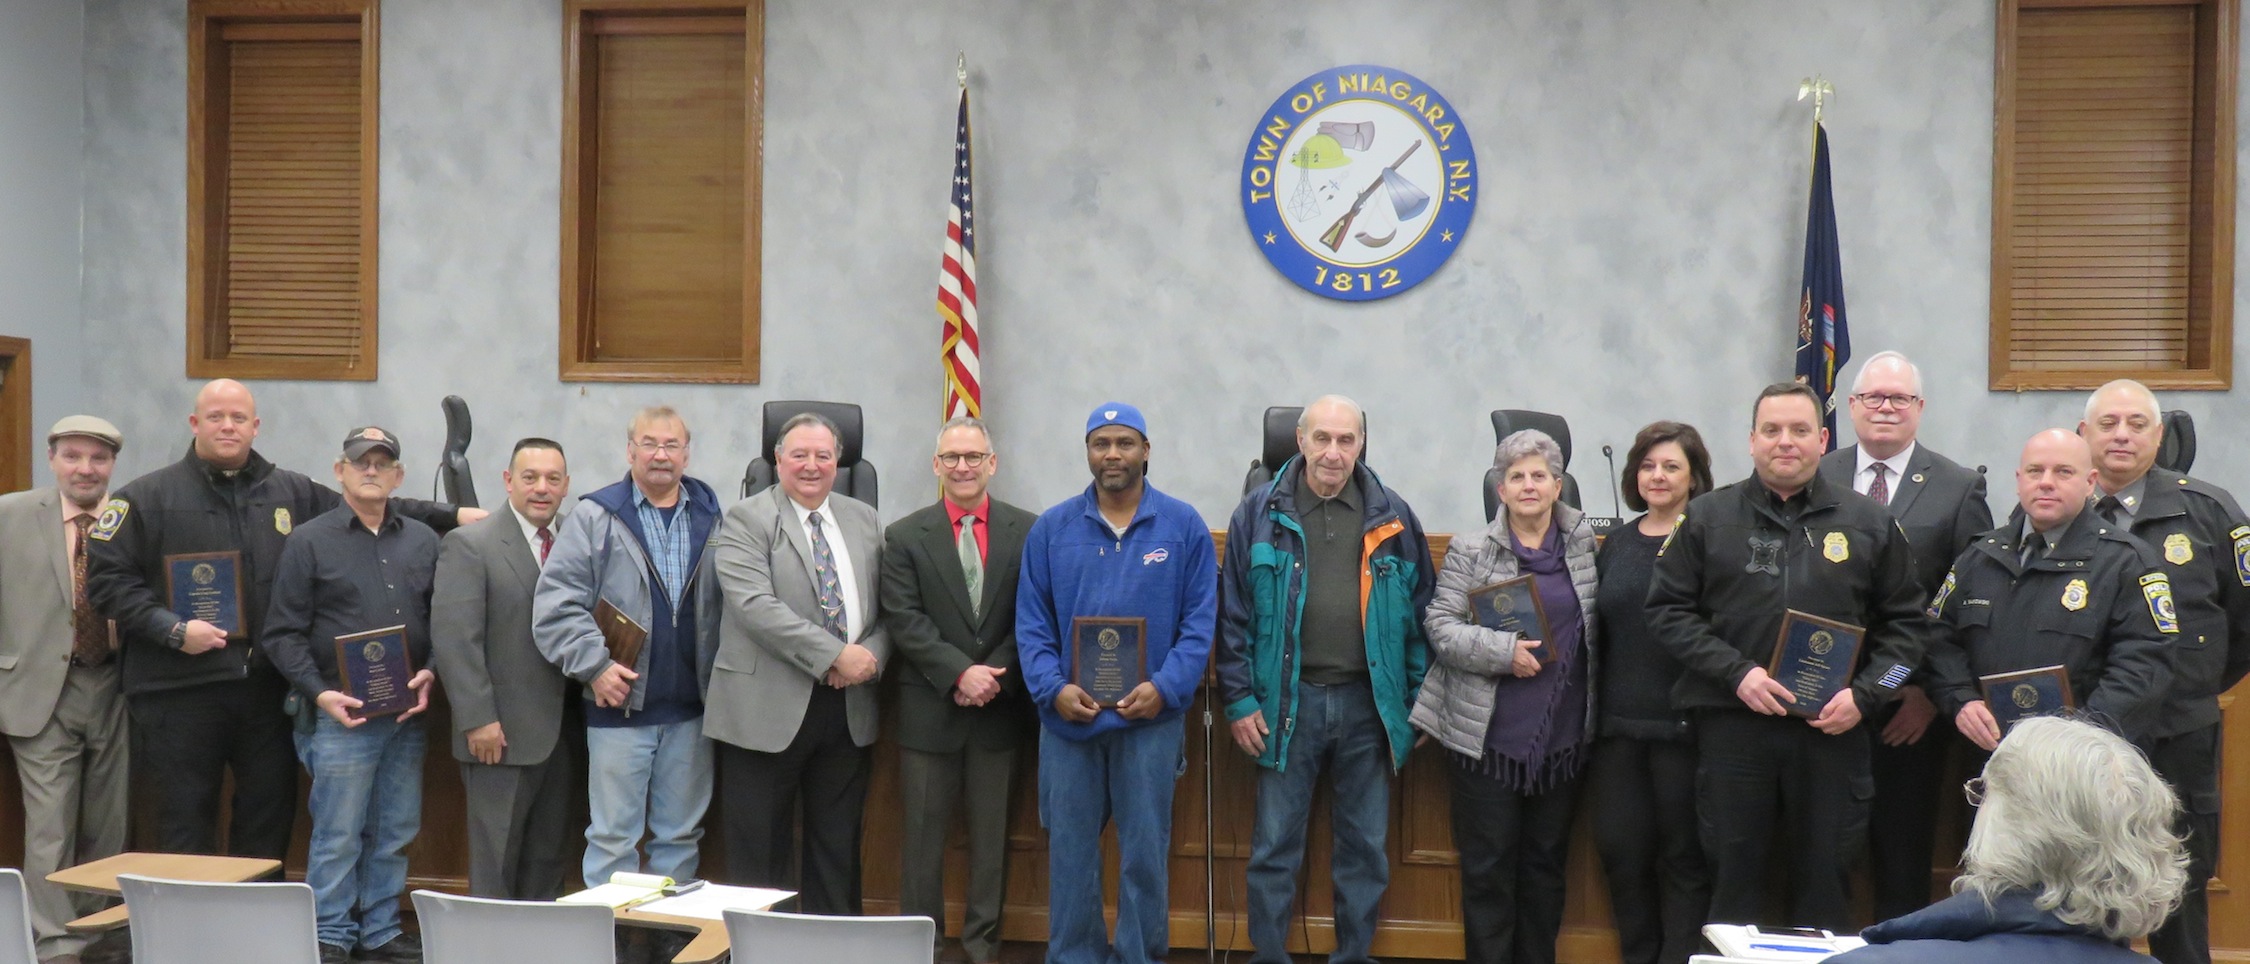 Pictured is the volunteers who were honored, along with the Town of Niagara Town Board at Tuesday's Town Board meeting.